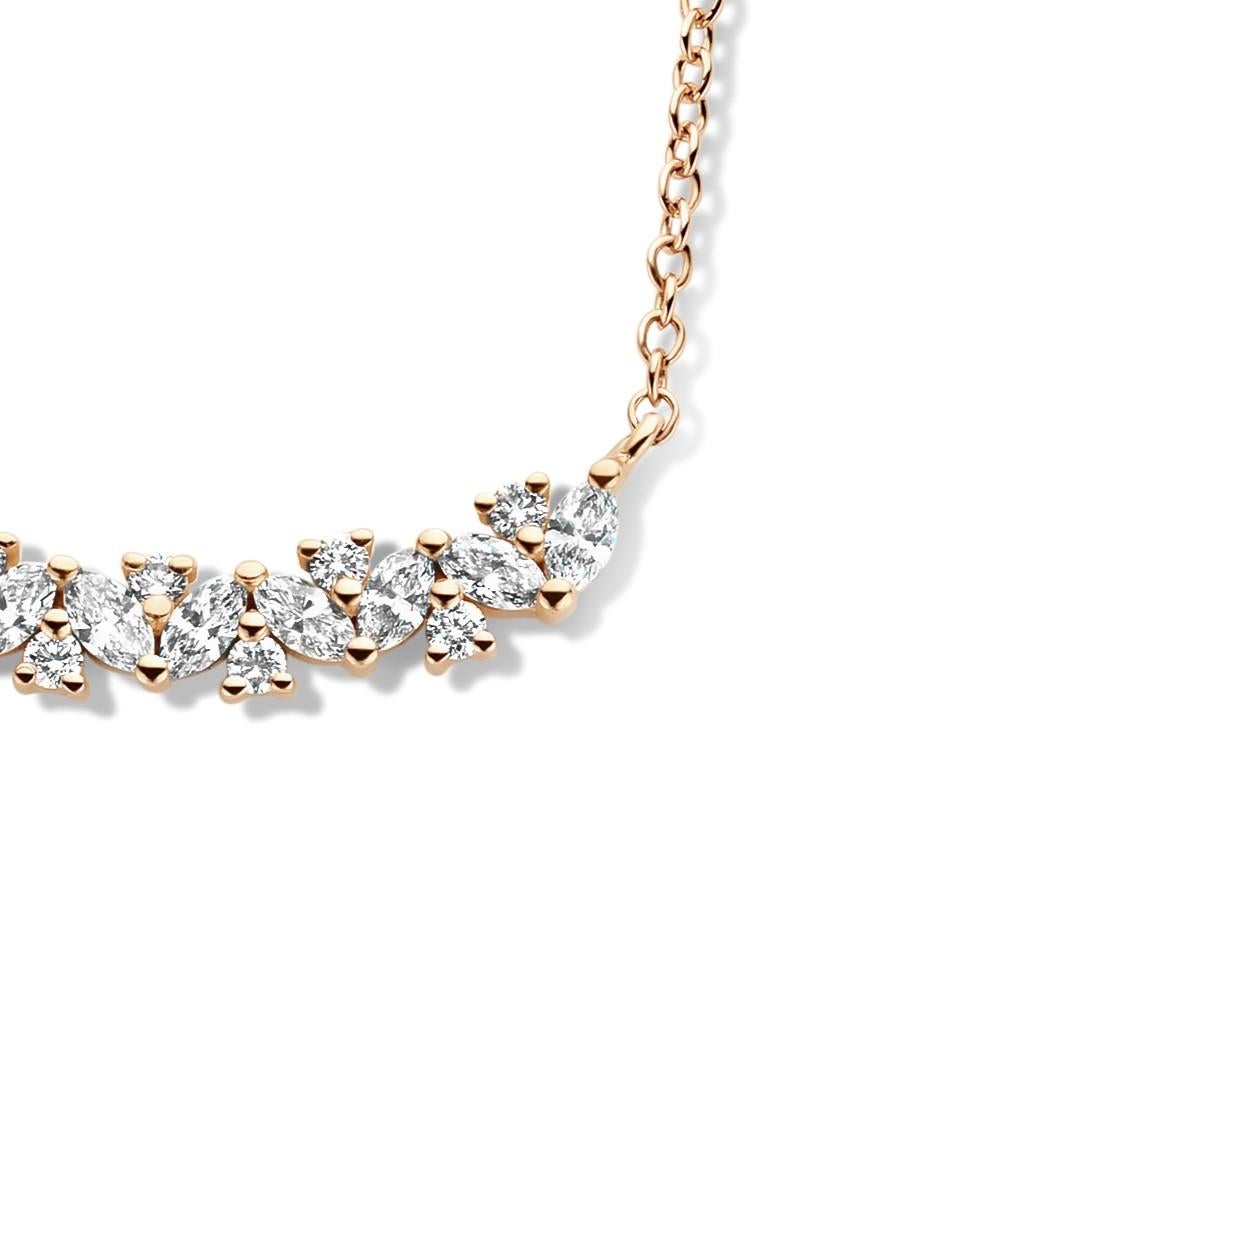 18K rose gold necklace has a rolo chain and is set with the finest diamonds in F/G-VS quality.  In this necklace, you have 10 marquise diamonds and 9 brilliant cut diamonds. Also, available in 18K white gold and 18K yellow gold.

The 18K rose gold